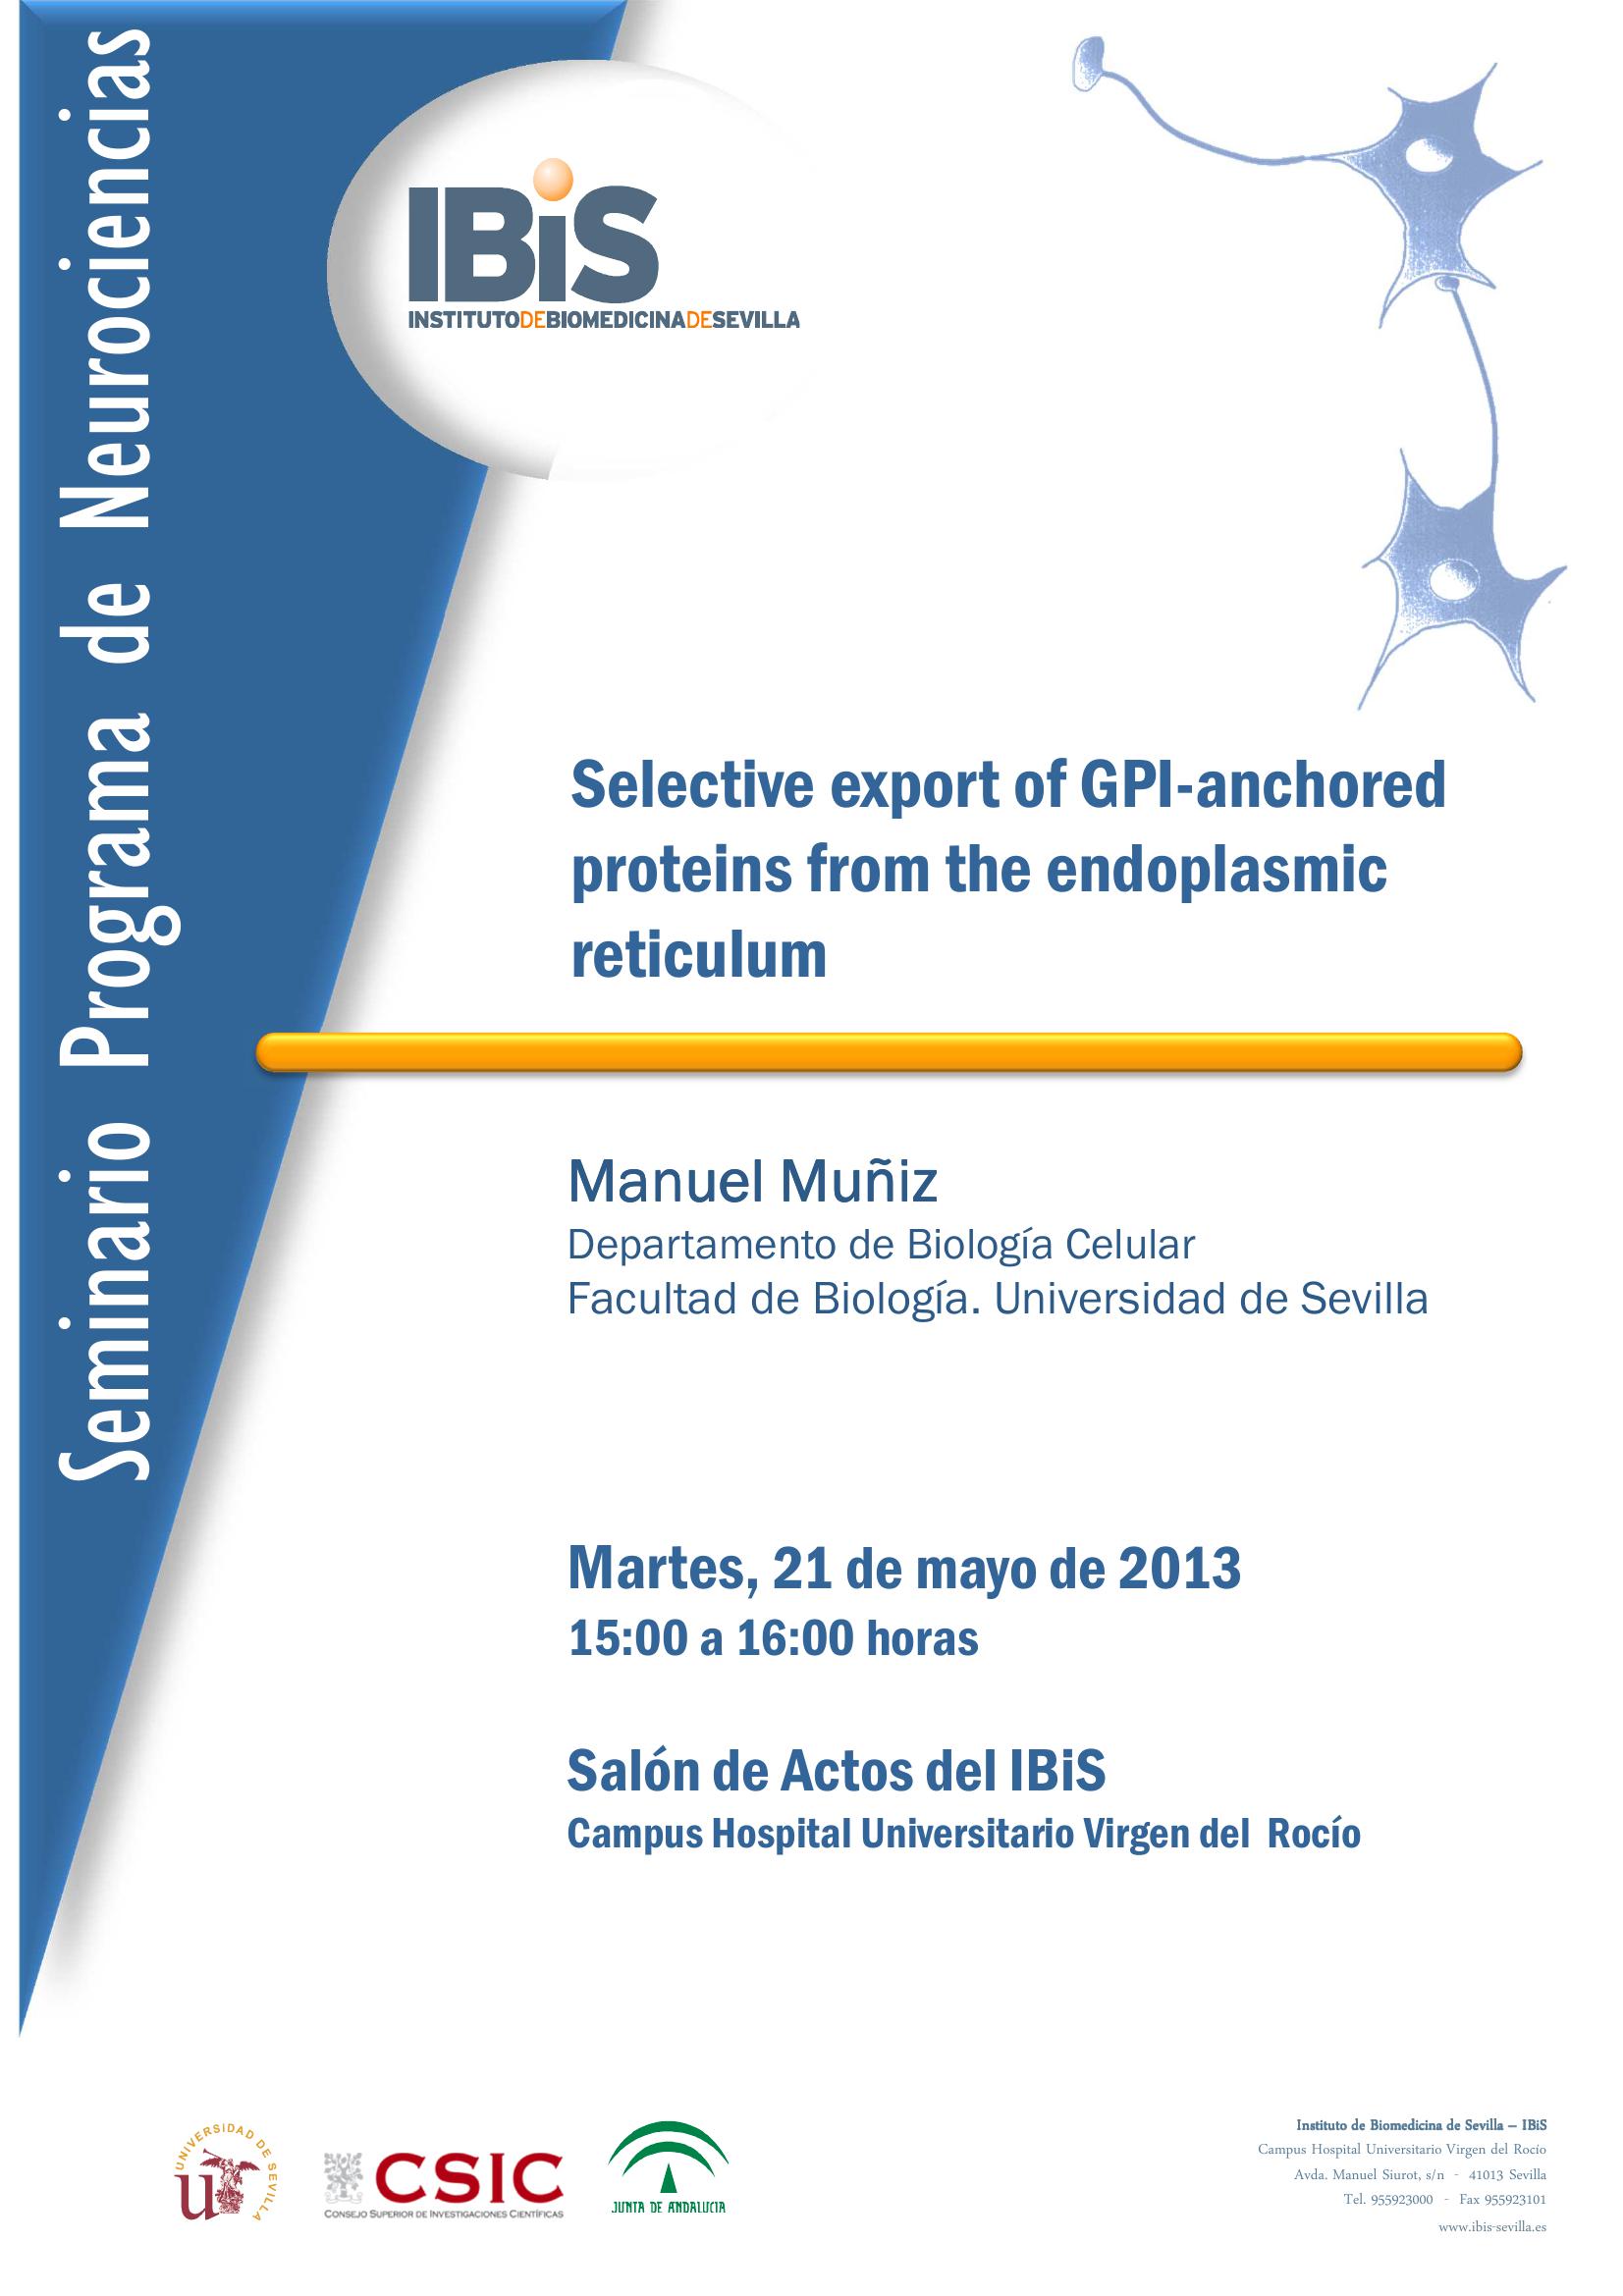 Poster: Selective export of GPI-anchored proteins from the endoplasmic reticulum